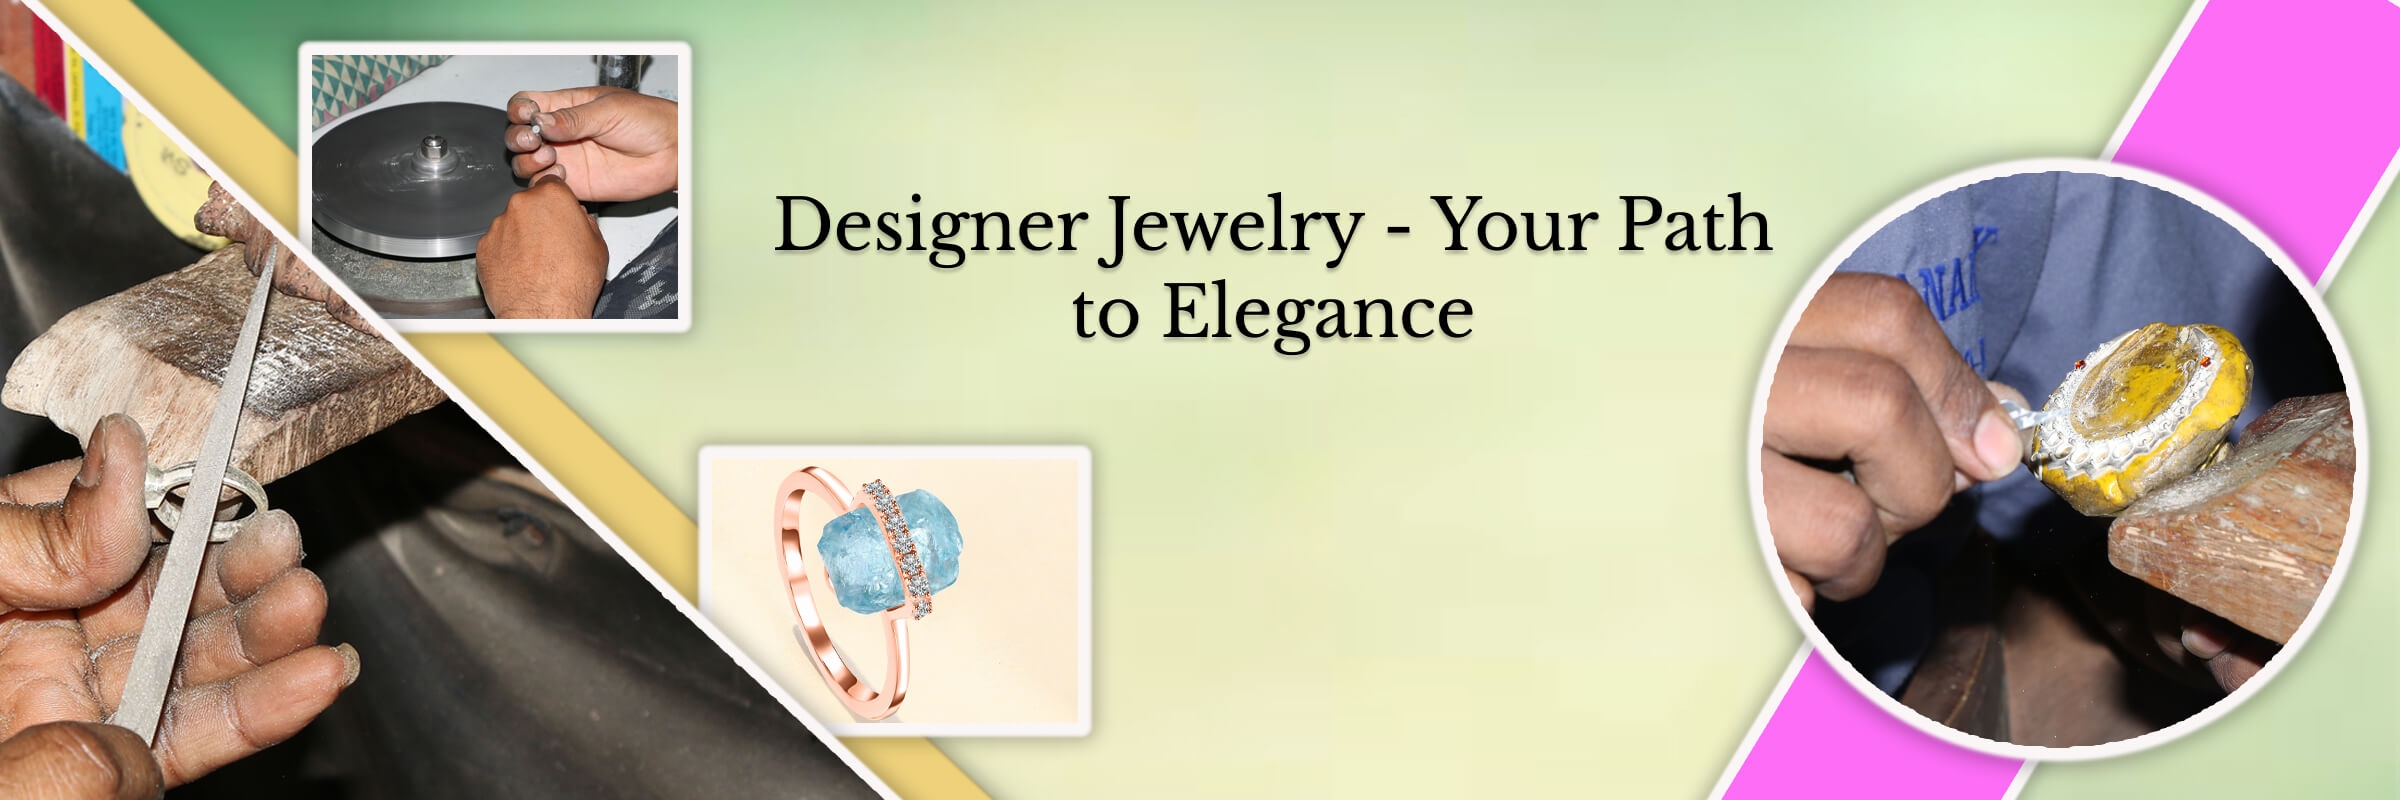 How to Get The Luxurious Look With Designer Jewelry